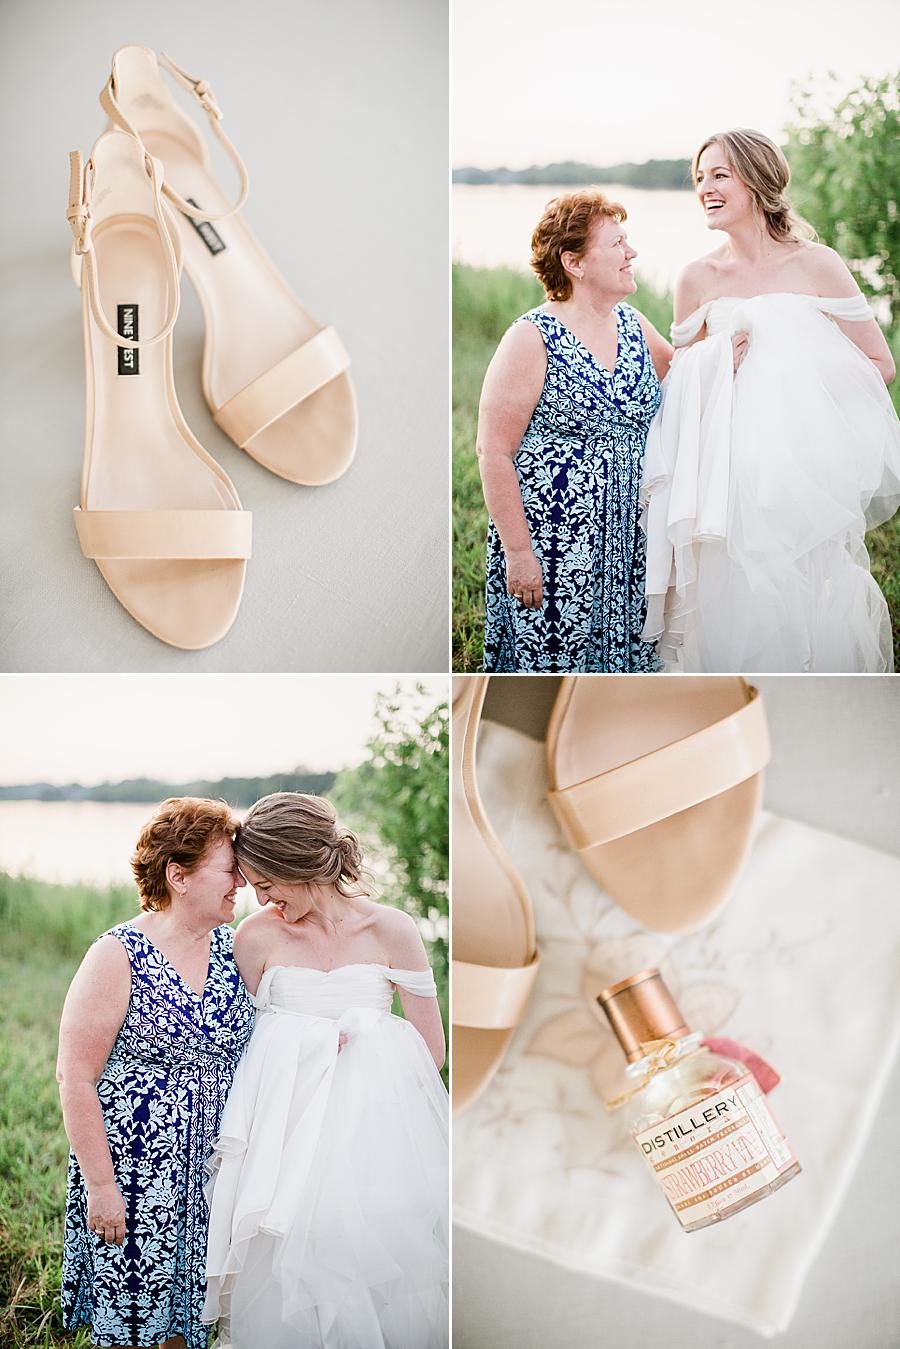 Cream bridal shoes at this Marblegate Farm Bridal Session by Knoxville Wedding Photographer, Amanda May Photos.